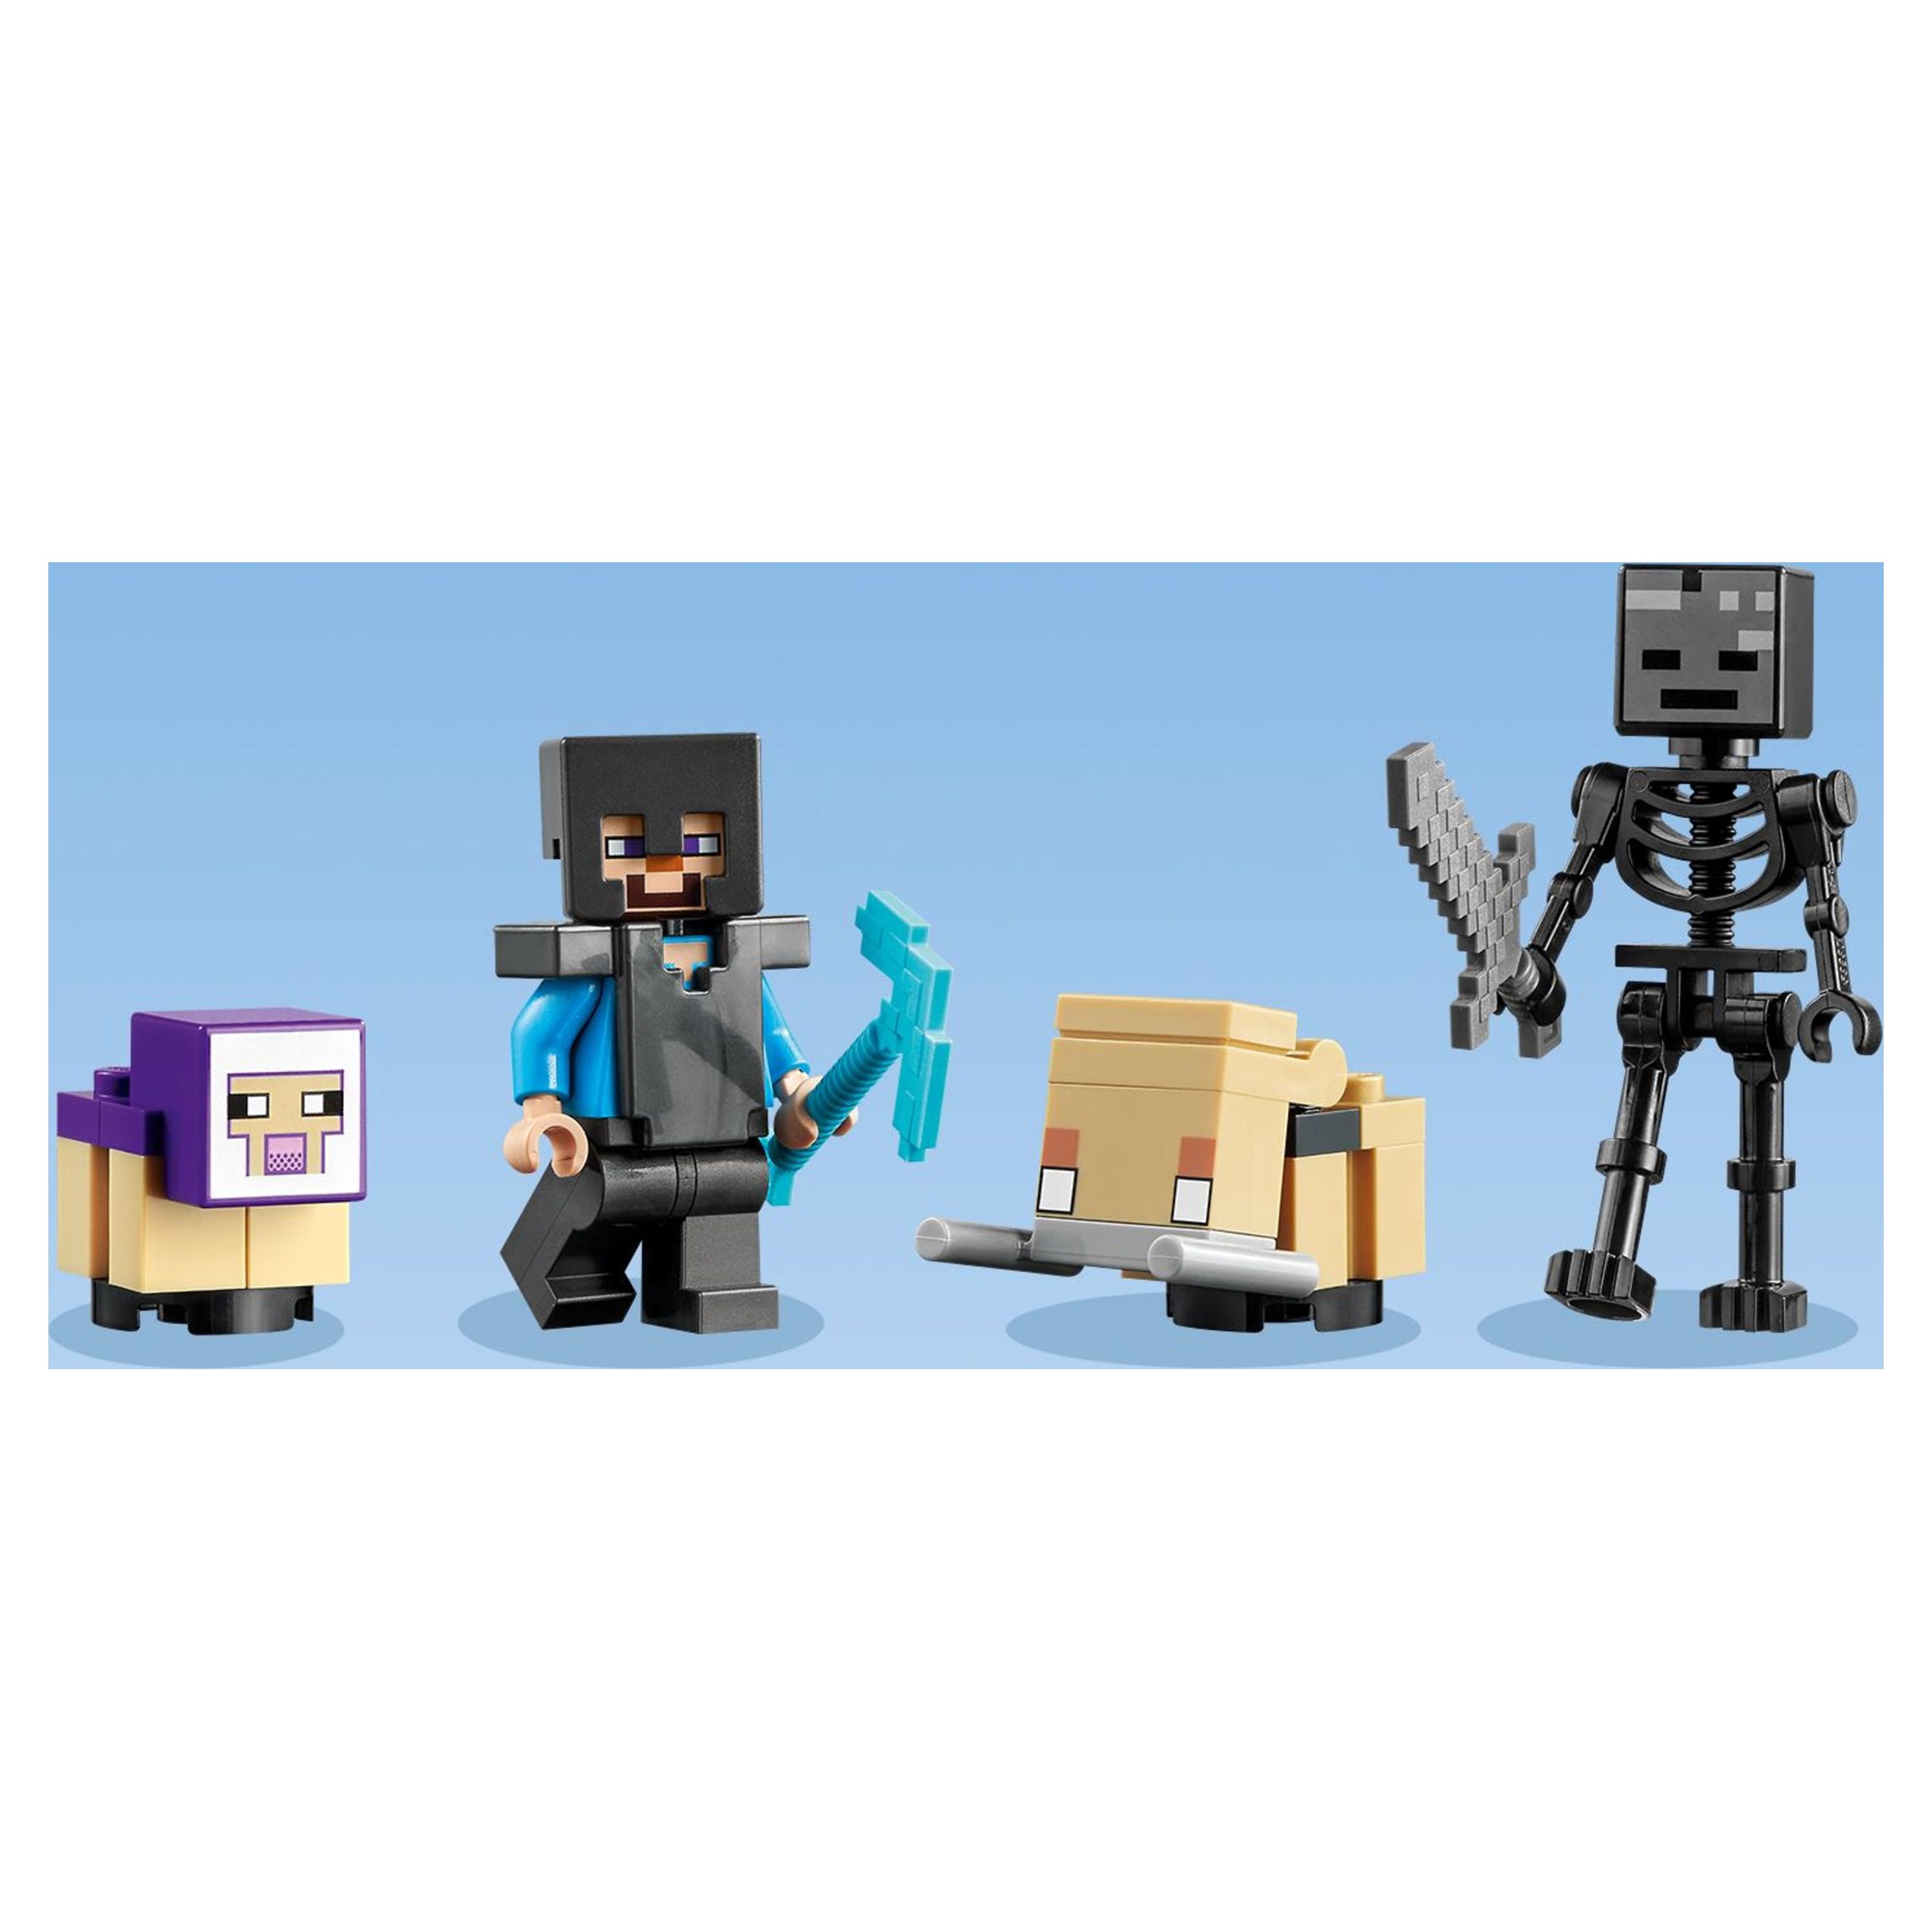 LEGO Minecraft The Ruined Portal Building Toy 21172 with Steve and Wither Skeleton Figures, Gift Idea for 8 Plus Year Old Kids, Boys & Girls - image 5 of 8